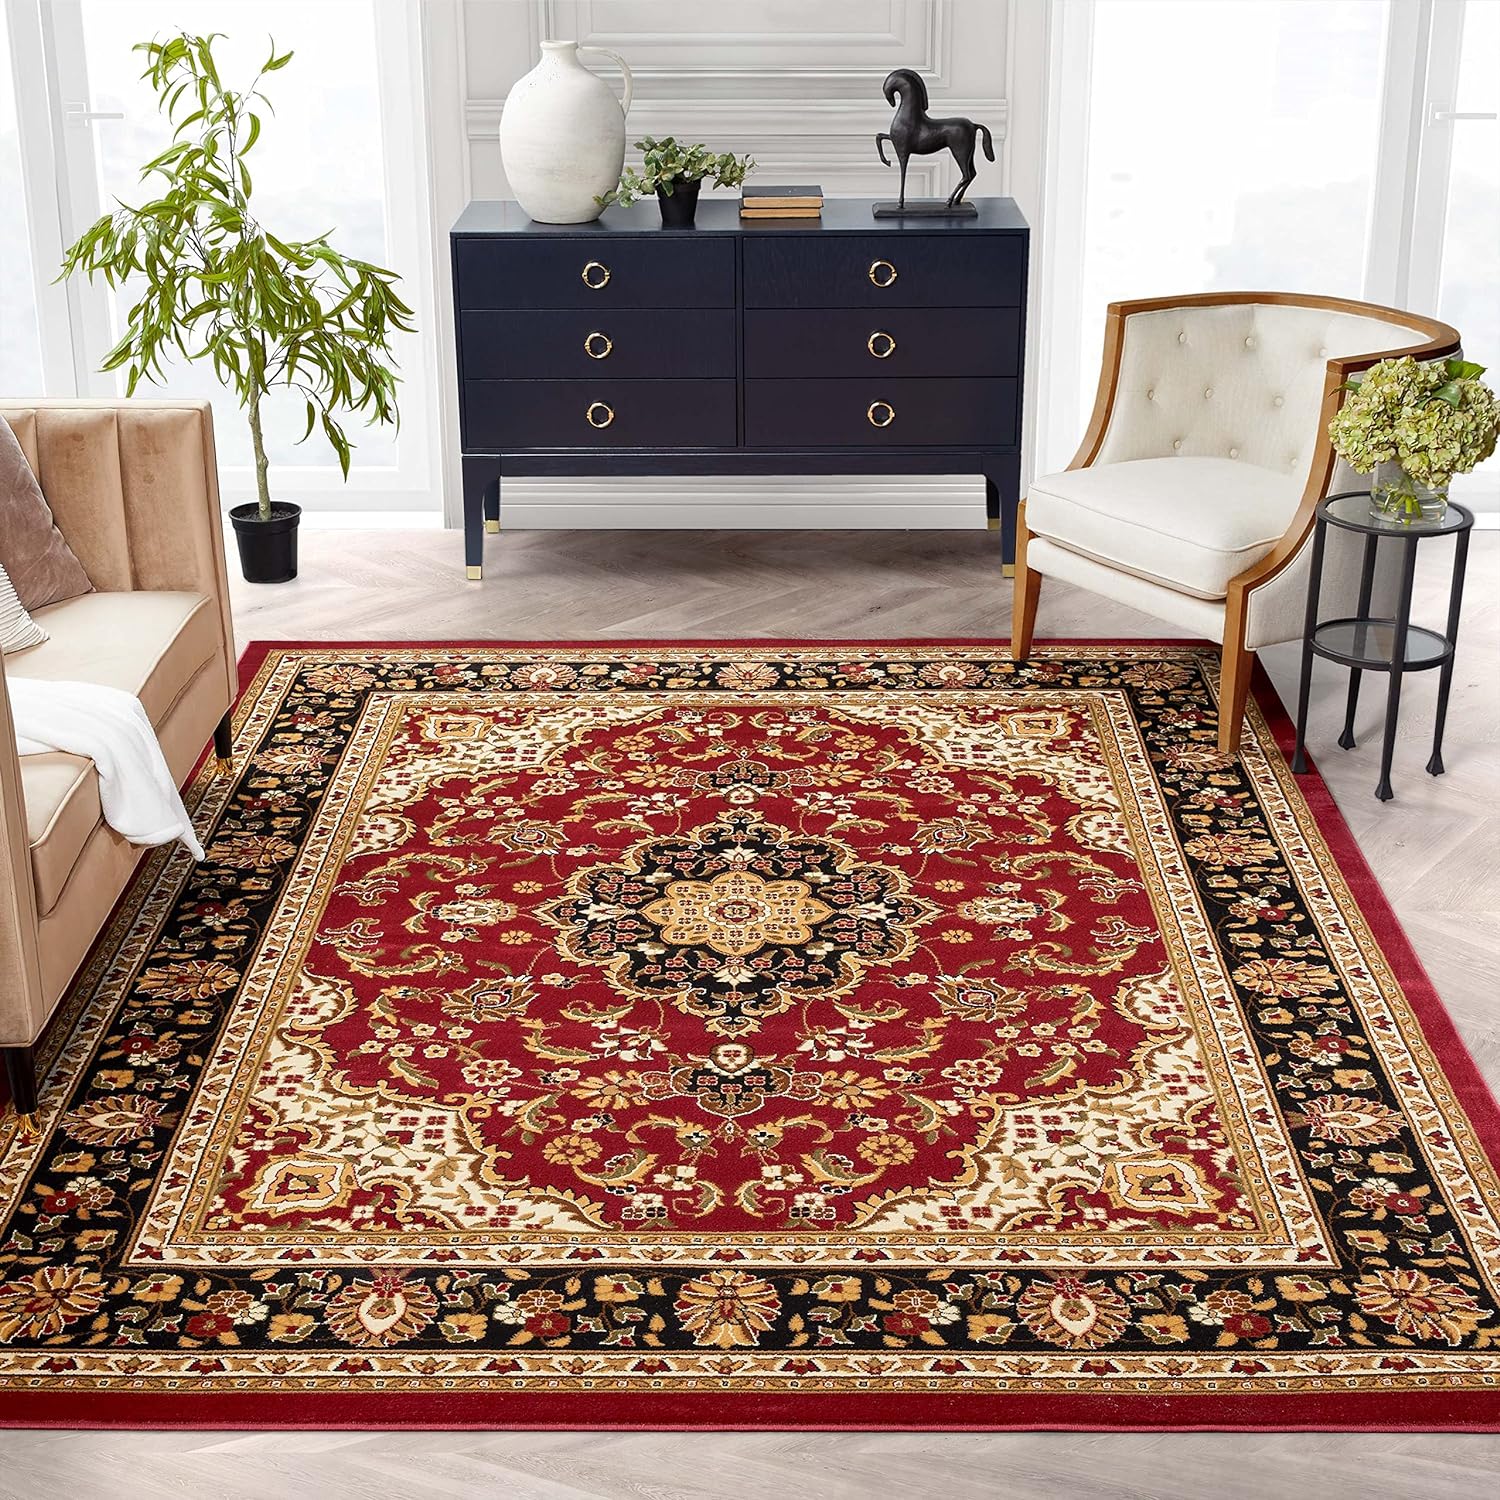 red Persian rug in living room